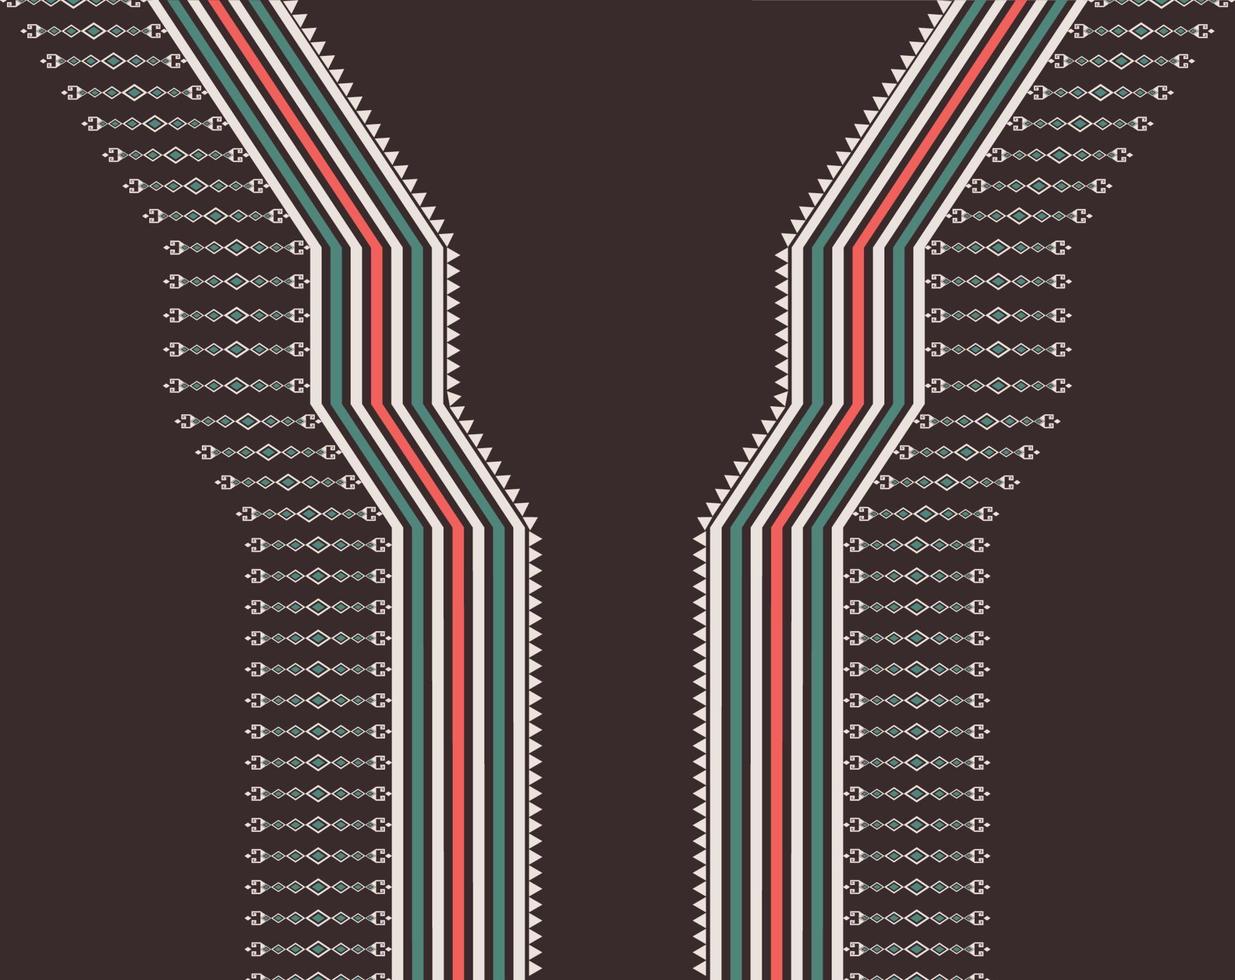 Geometric simple pattern design for collar shirts, neck line. Ethnic tribal red-green on brown color background. Use for fabric elements, ornament, motif. vector